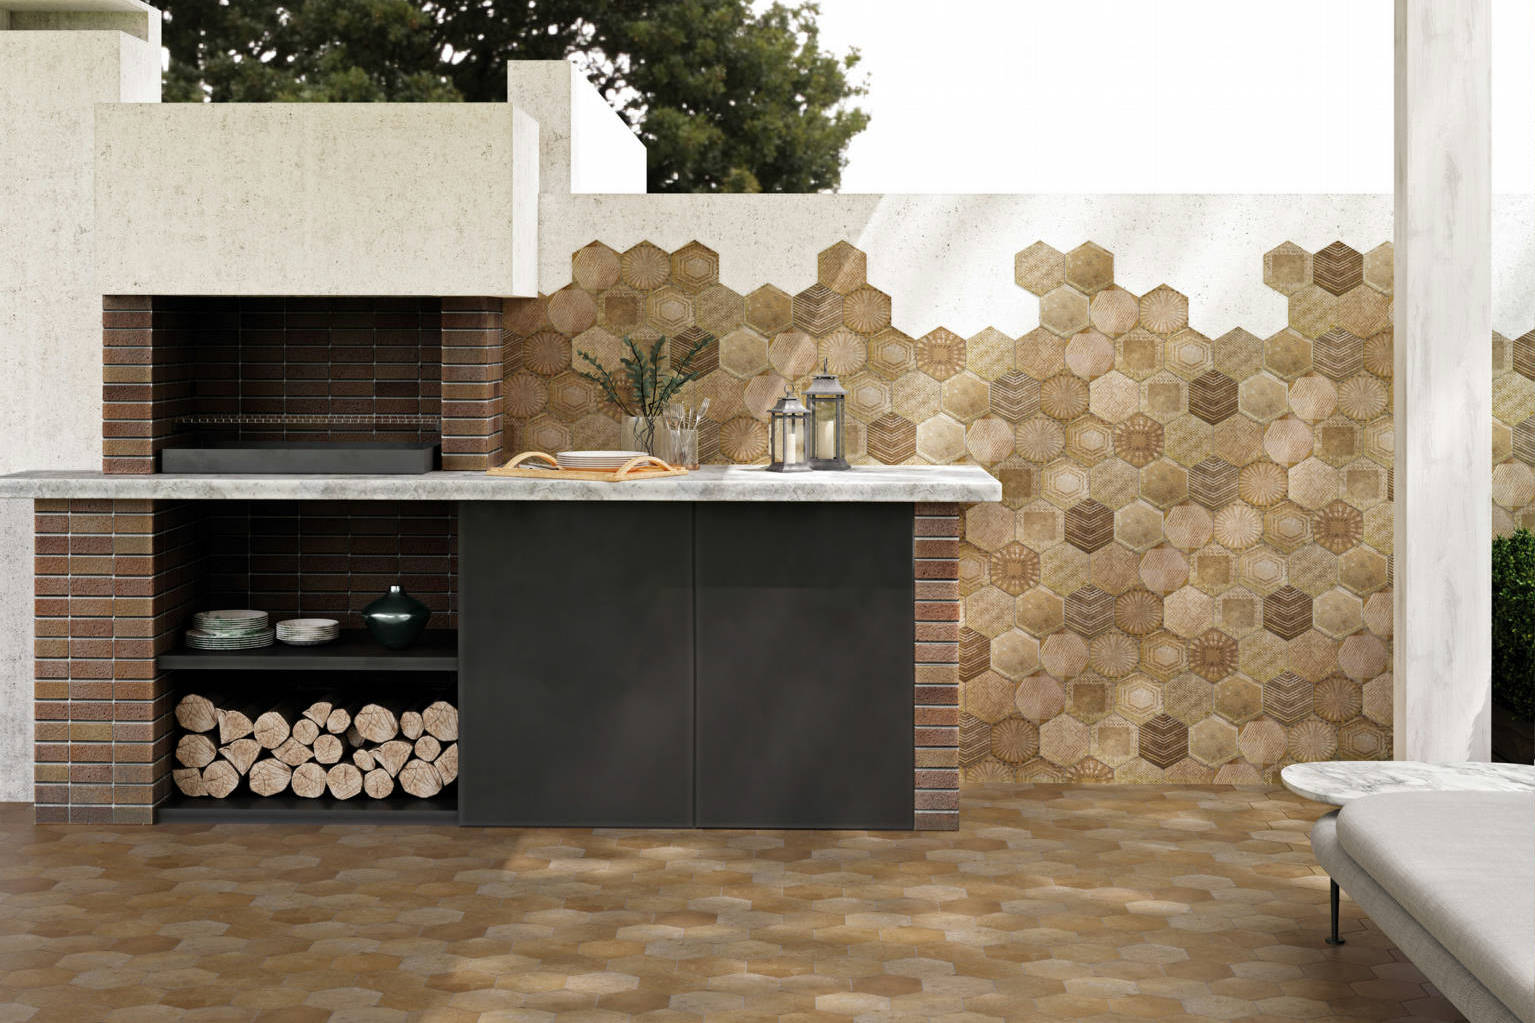 Alma 5.5x6.3” Terra and Sand Decor Hexagon | Qualis Ceramica | Luxury Tile and Vinyl at affordable prices